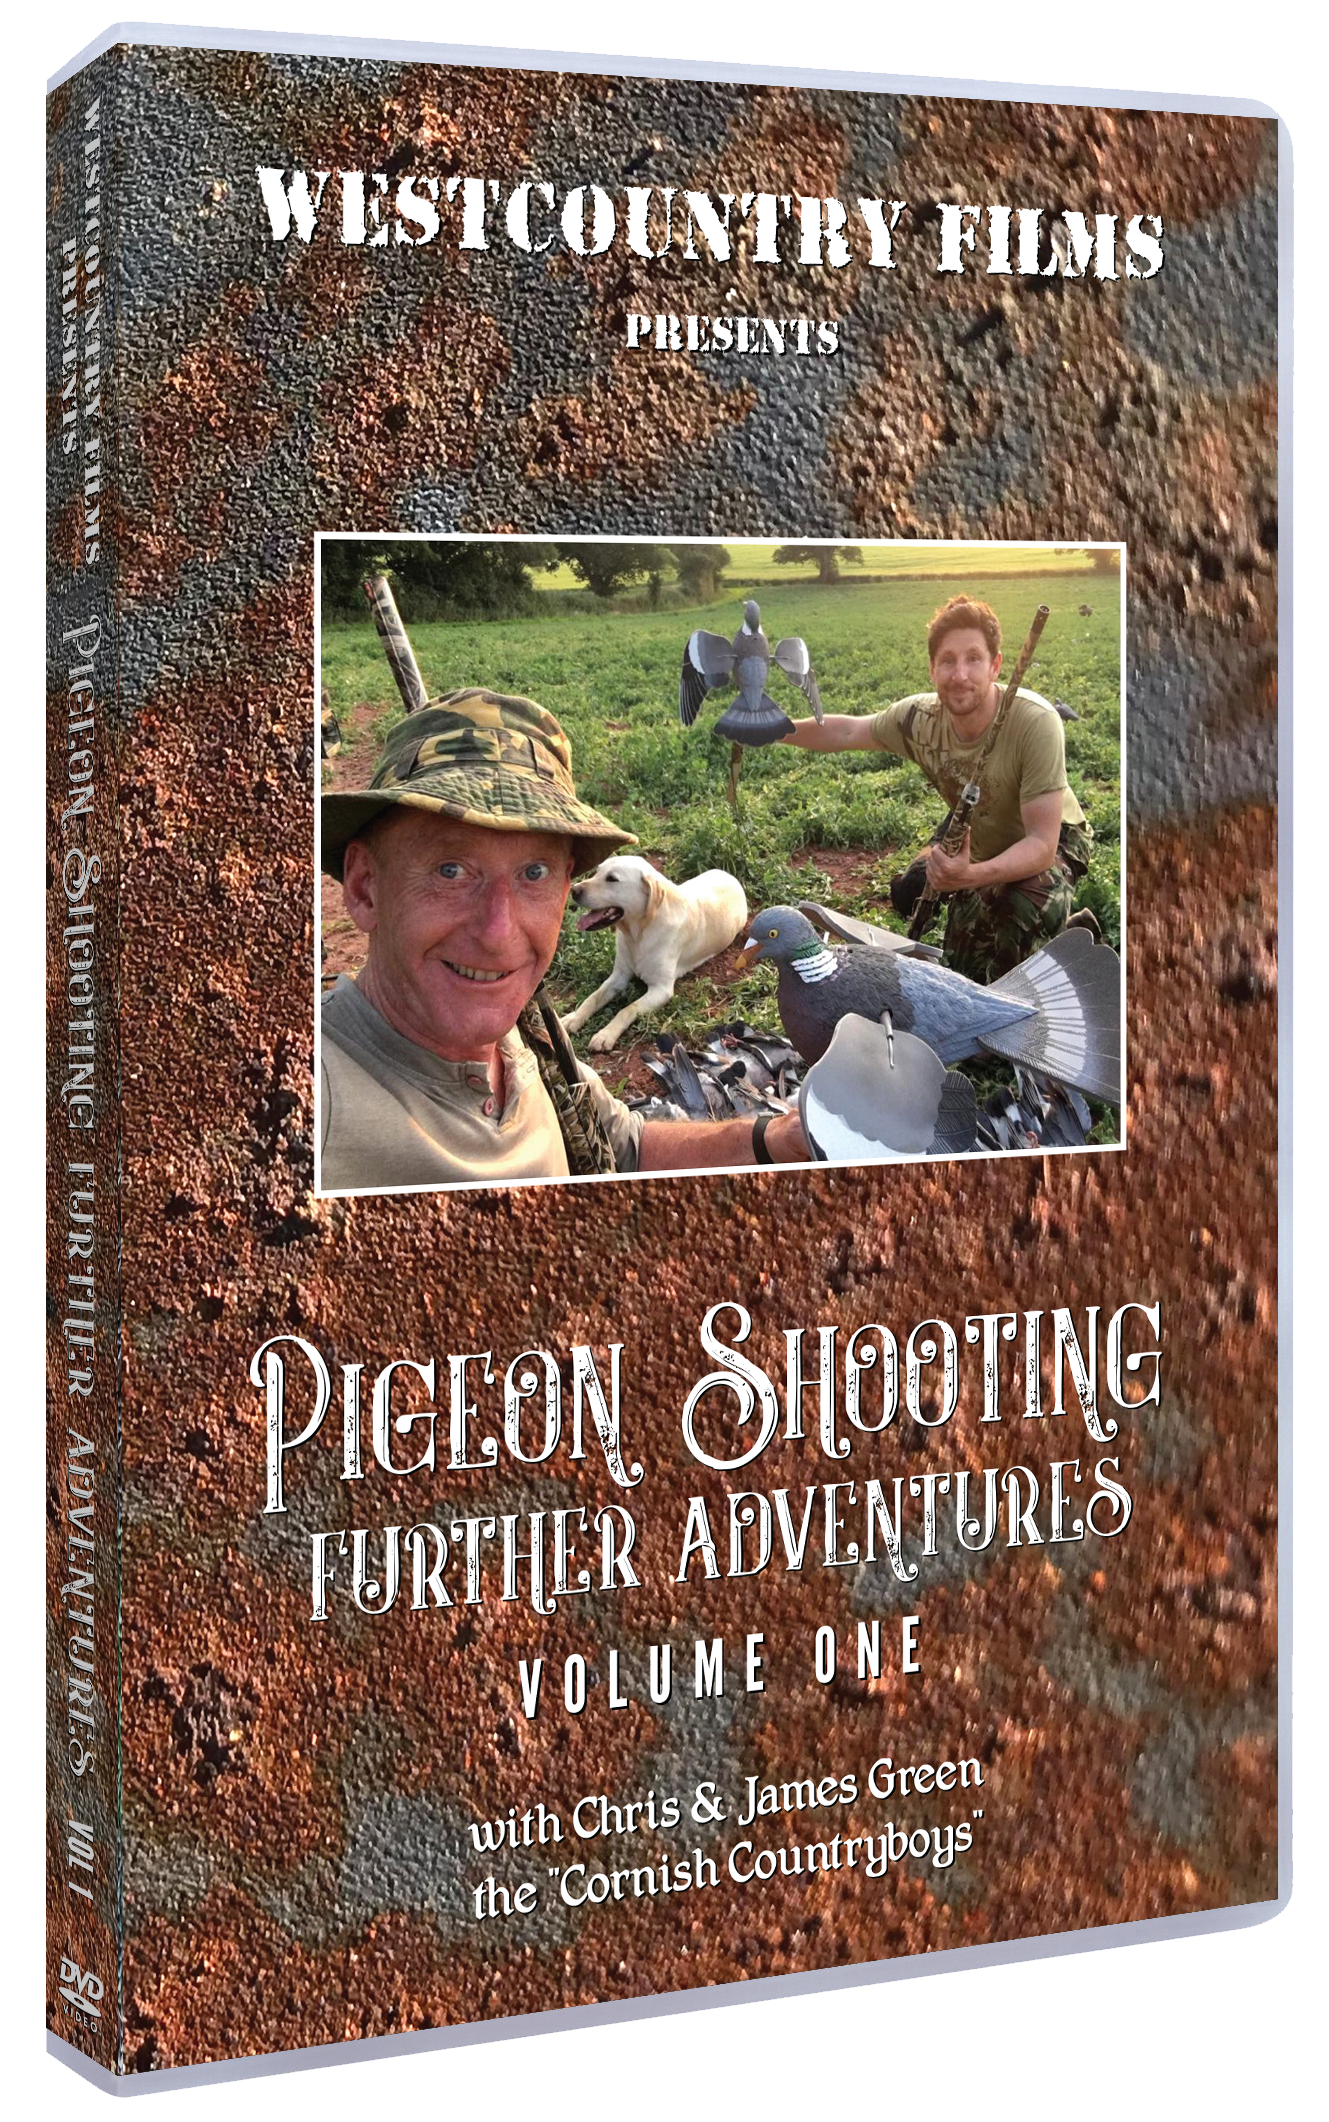 PIGEON SHOOTING FURTHER ADVENTURES – VOLUME ONE